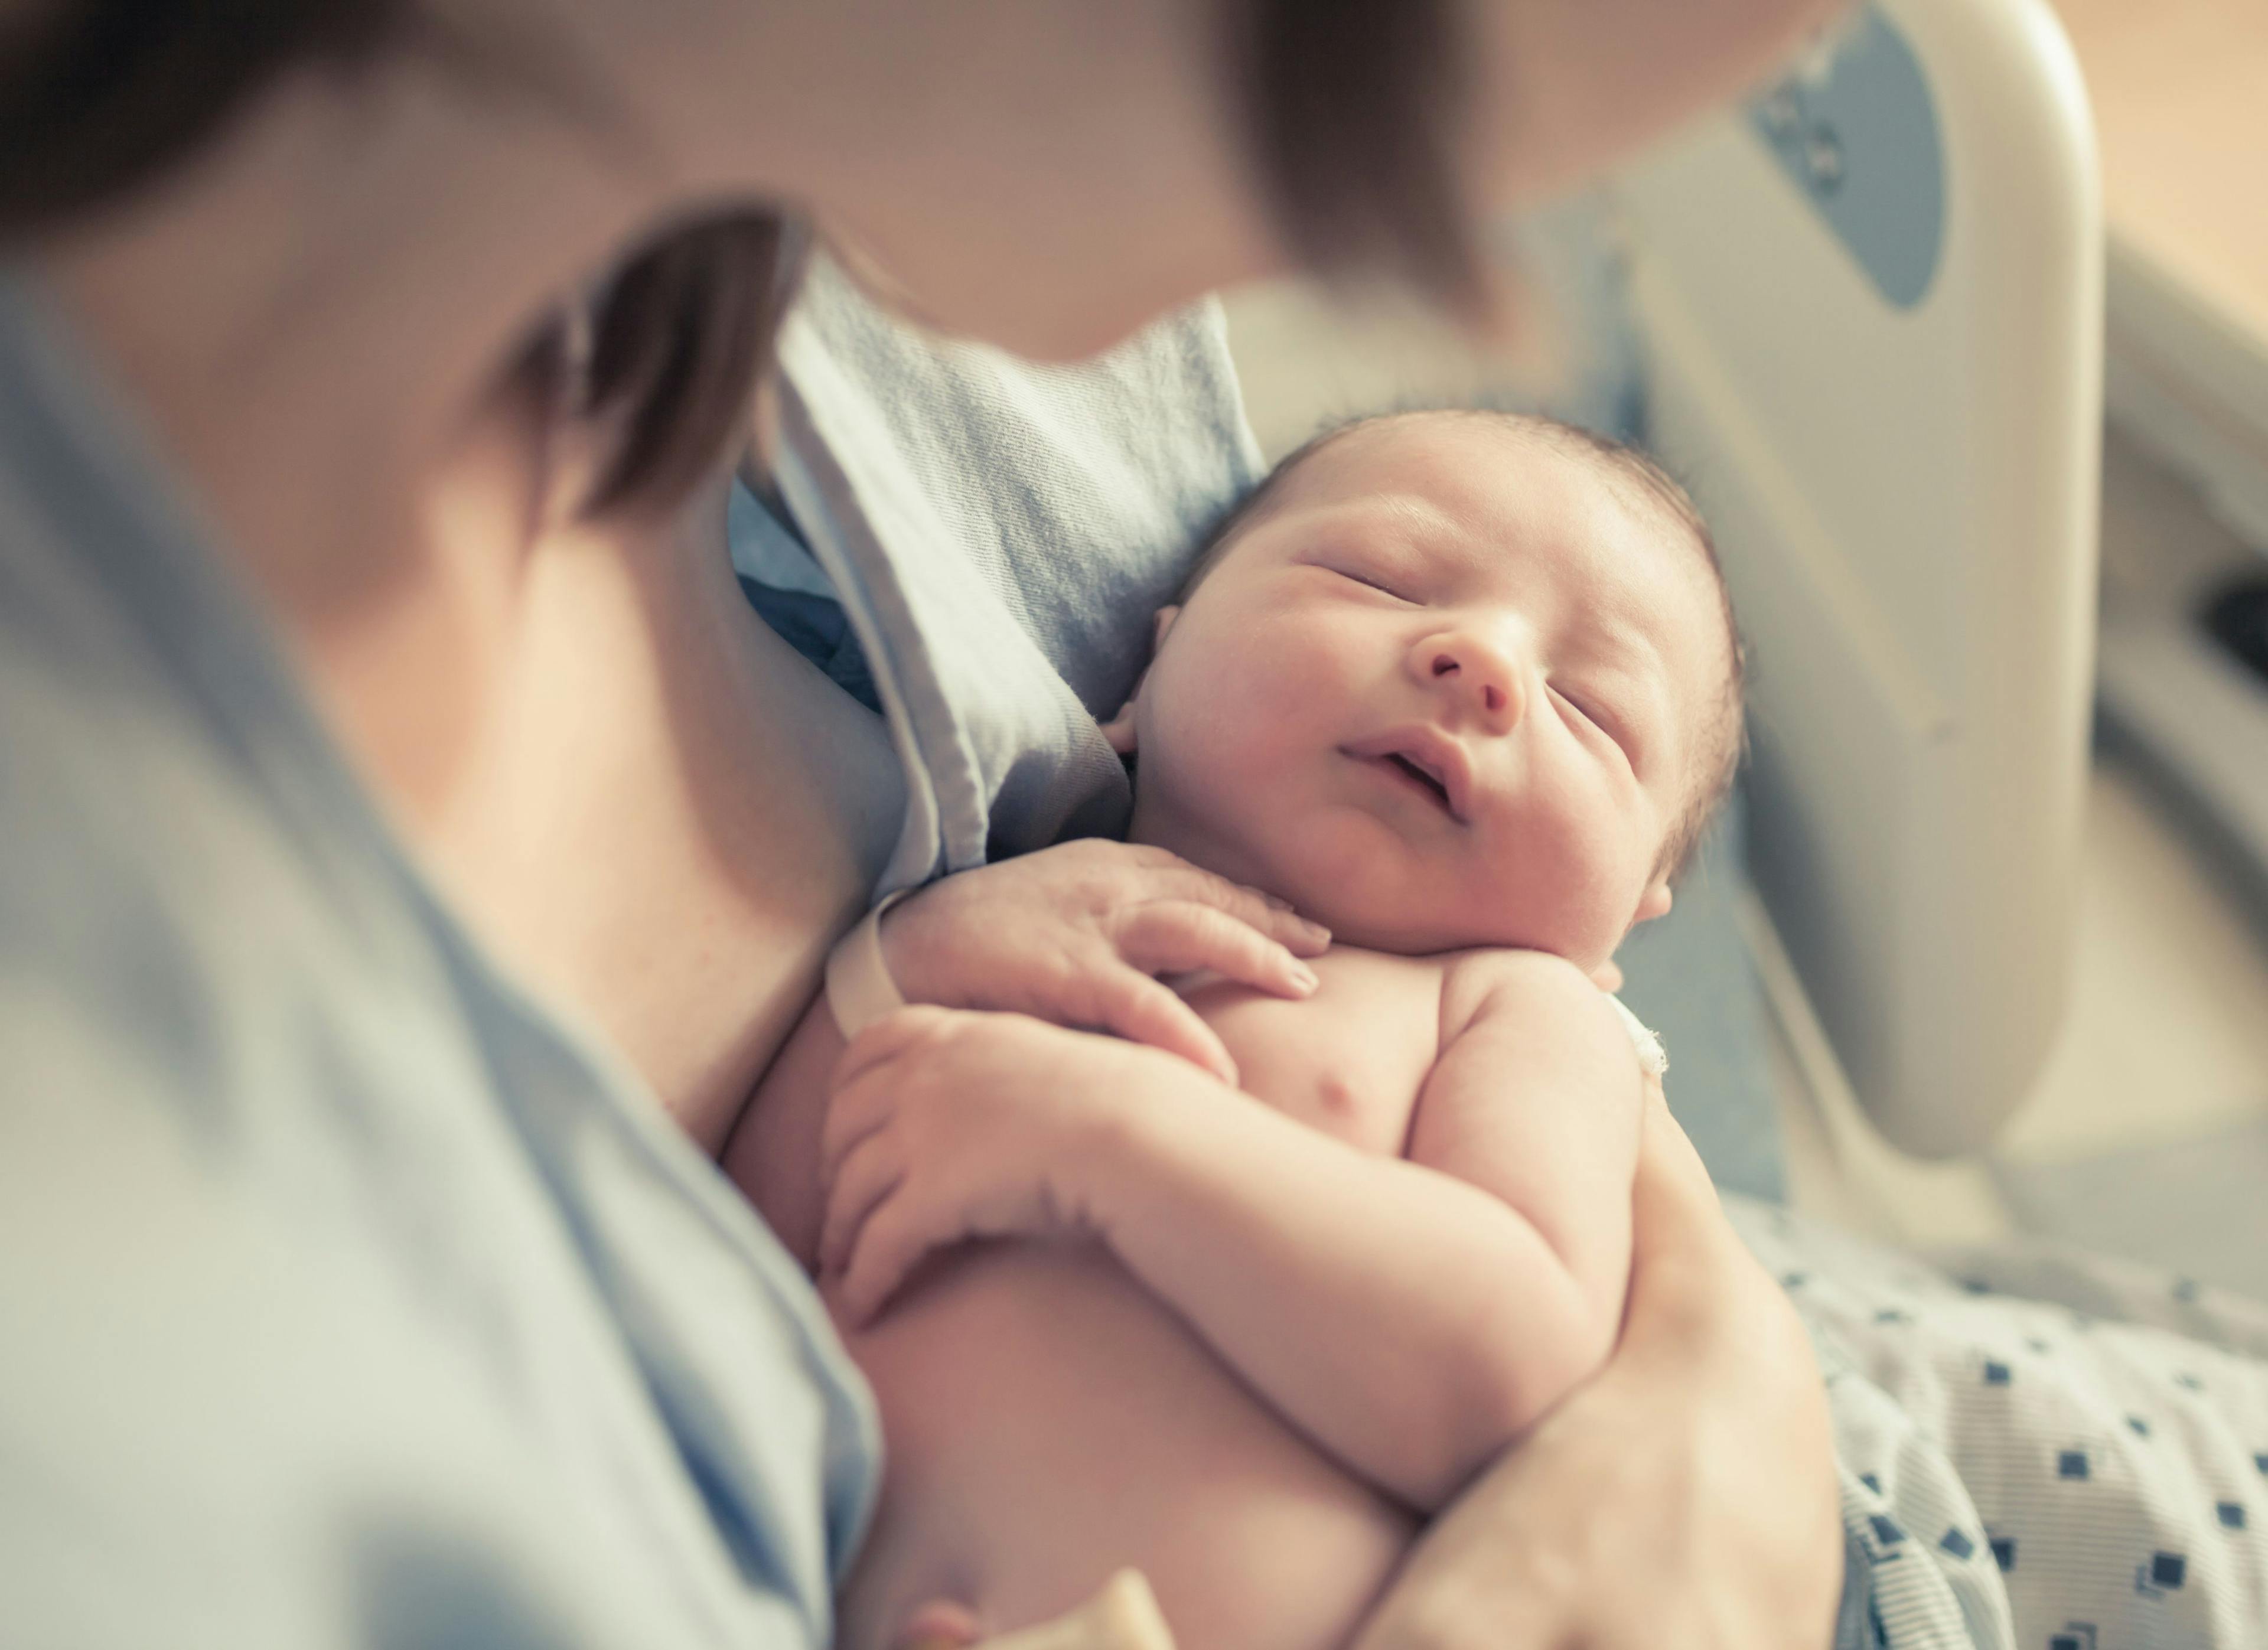 Experts call for better newborn screening to take advantage of novel therapies